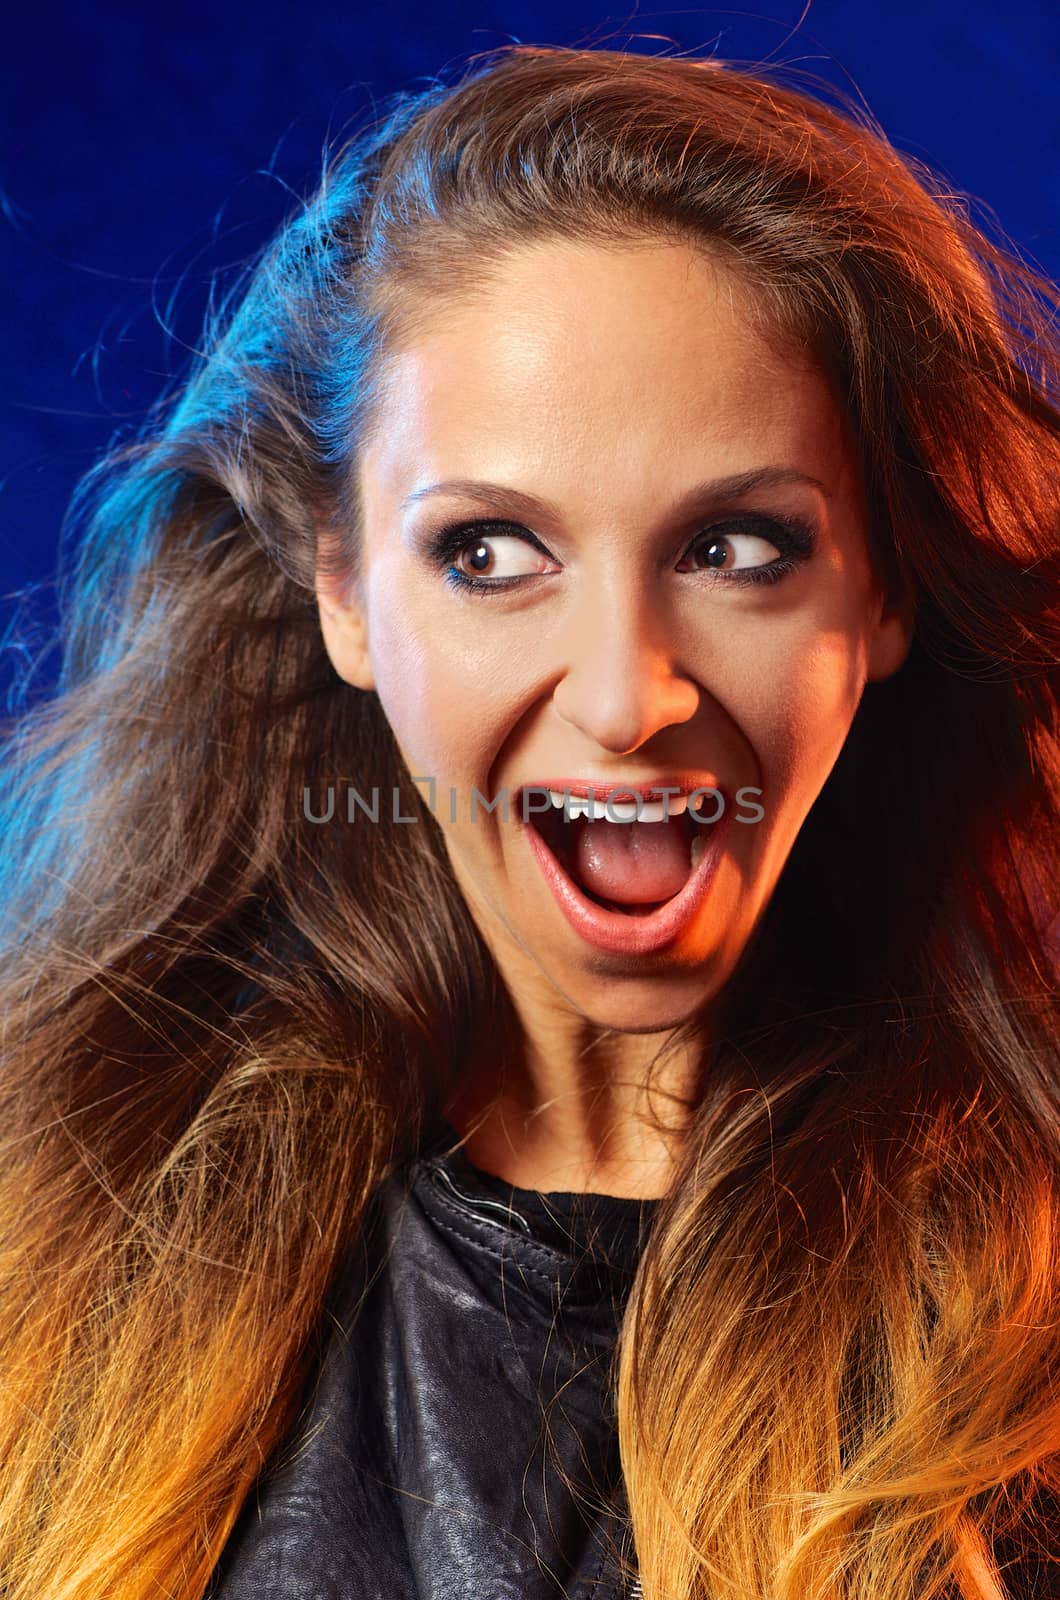 Emotional portrait of happy young woman